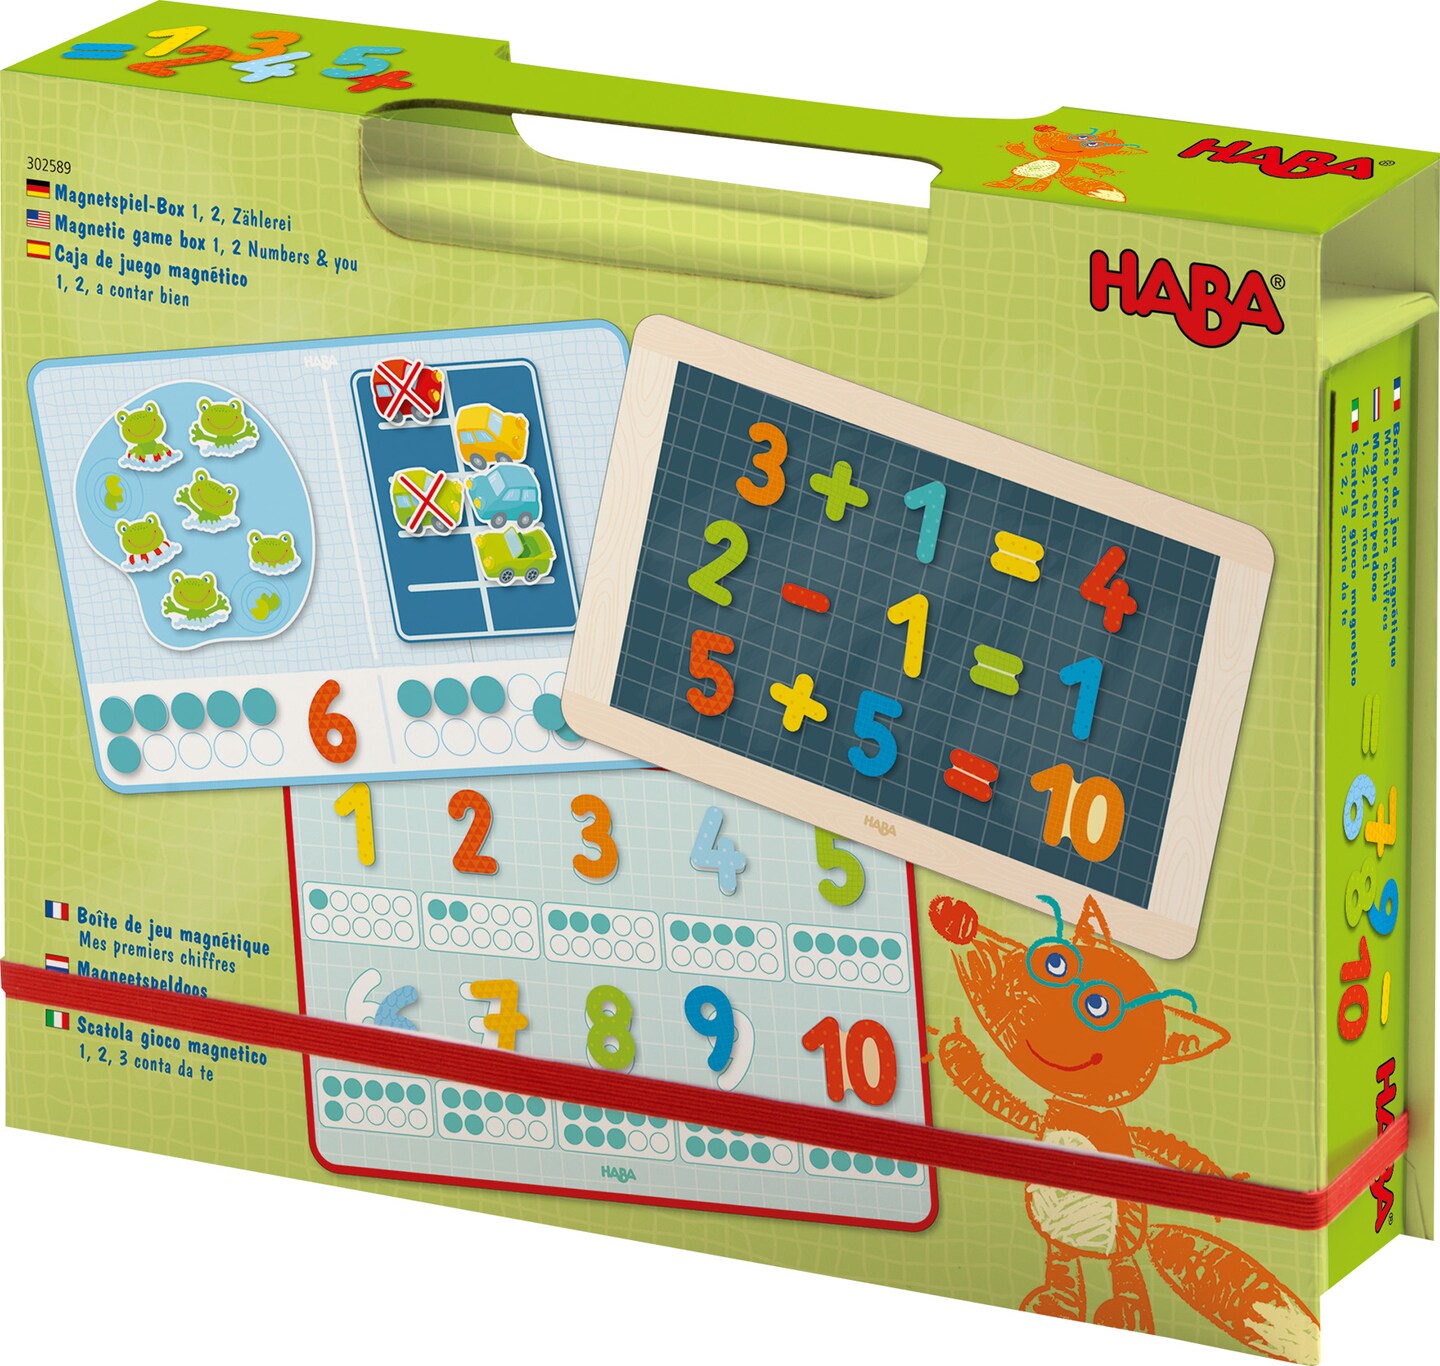 Magnetic Game Box 1 2 3 Numbers &#x26; You - 158 Magnetic Pieces in Travel Cardboard Carrying Case